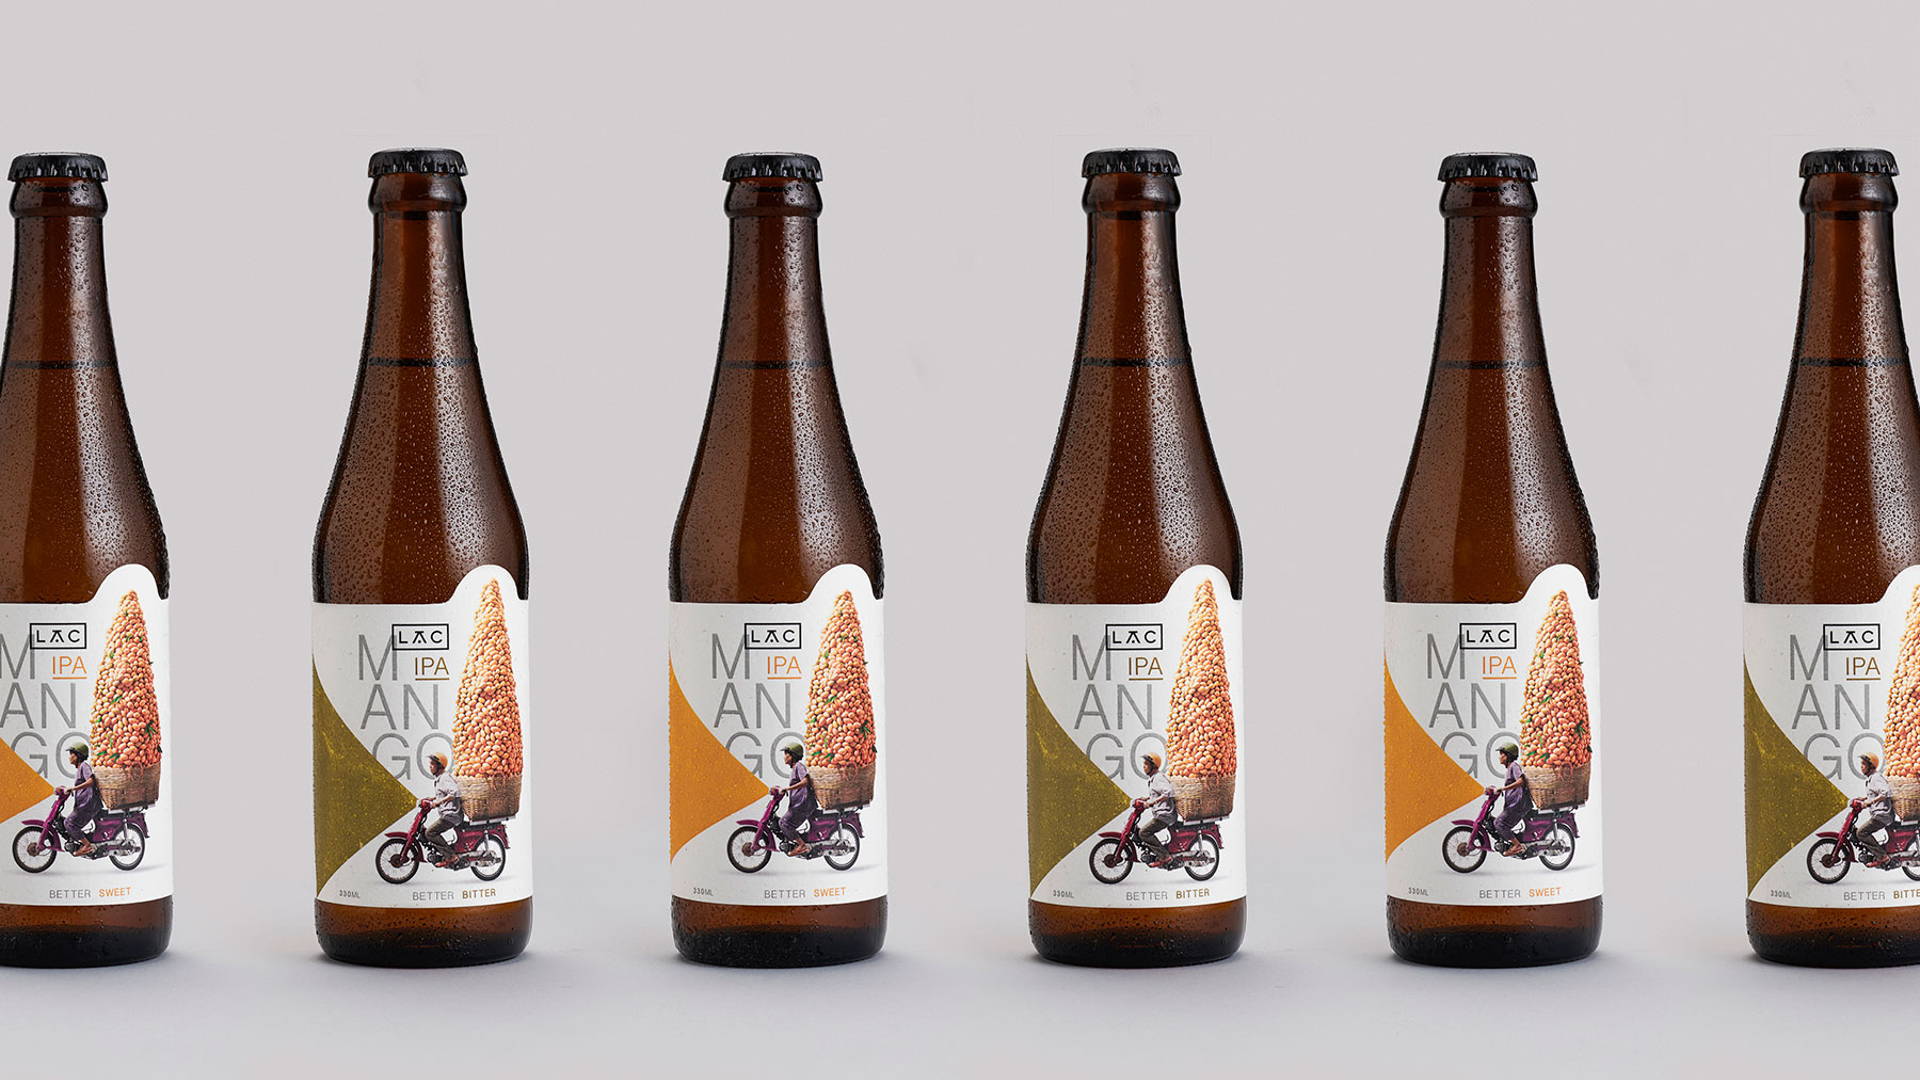 Featured image for Lac Mango IPA Pays Homage To Mango Sellers Of Vietnam